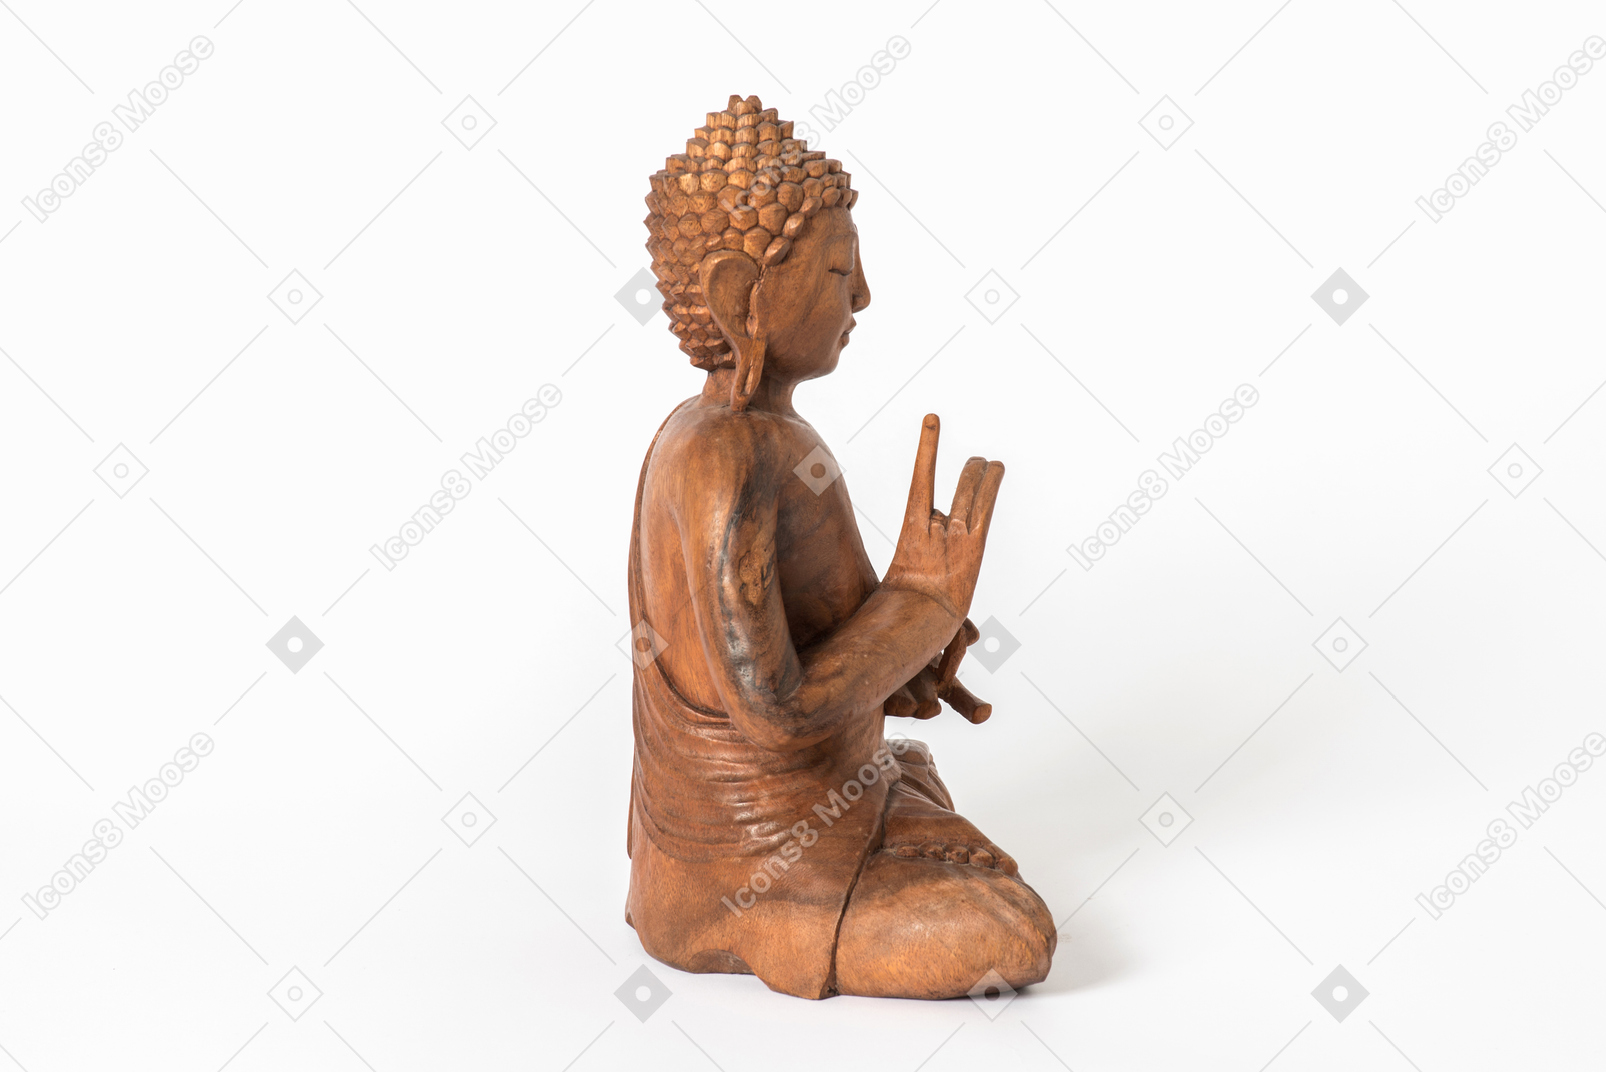 Buddha statue placed in profile on white background